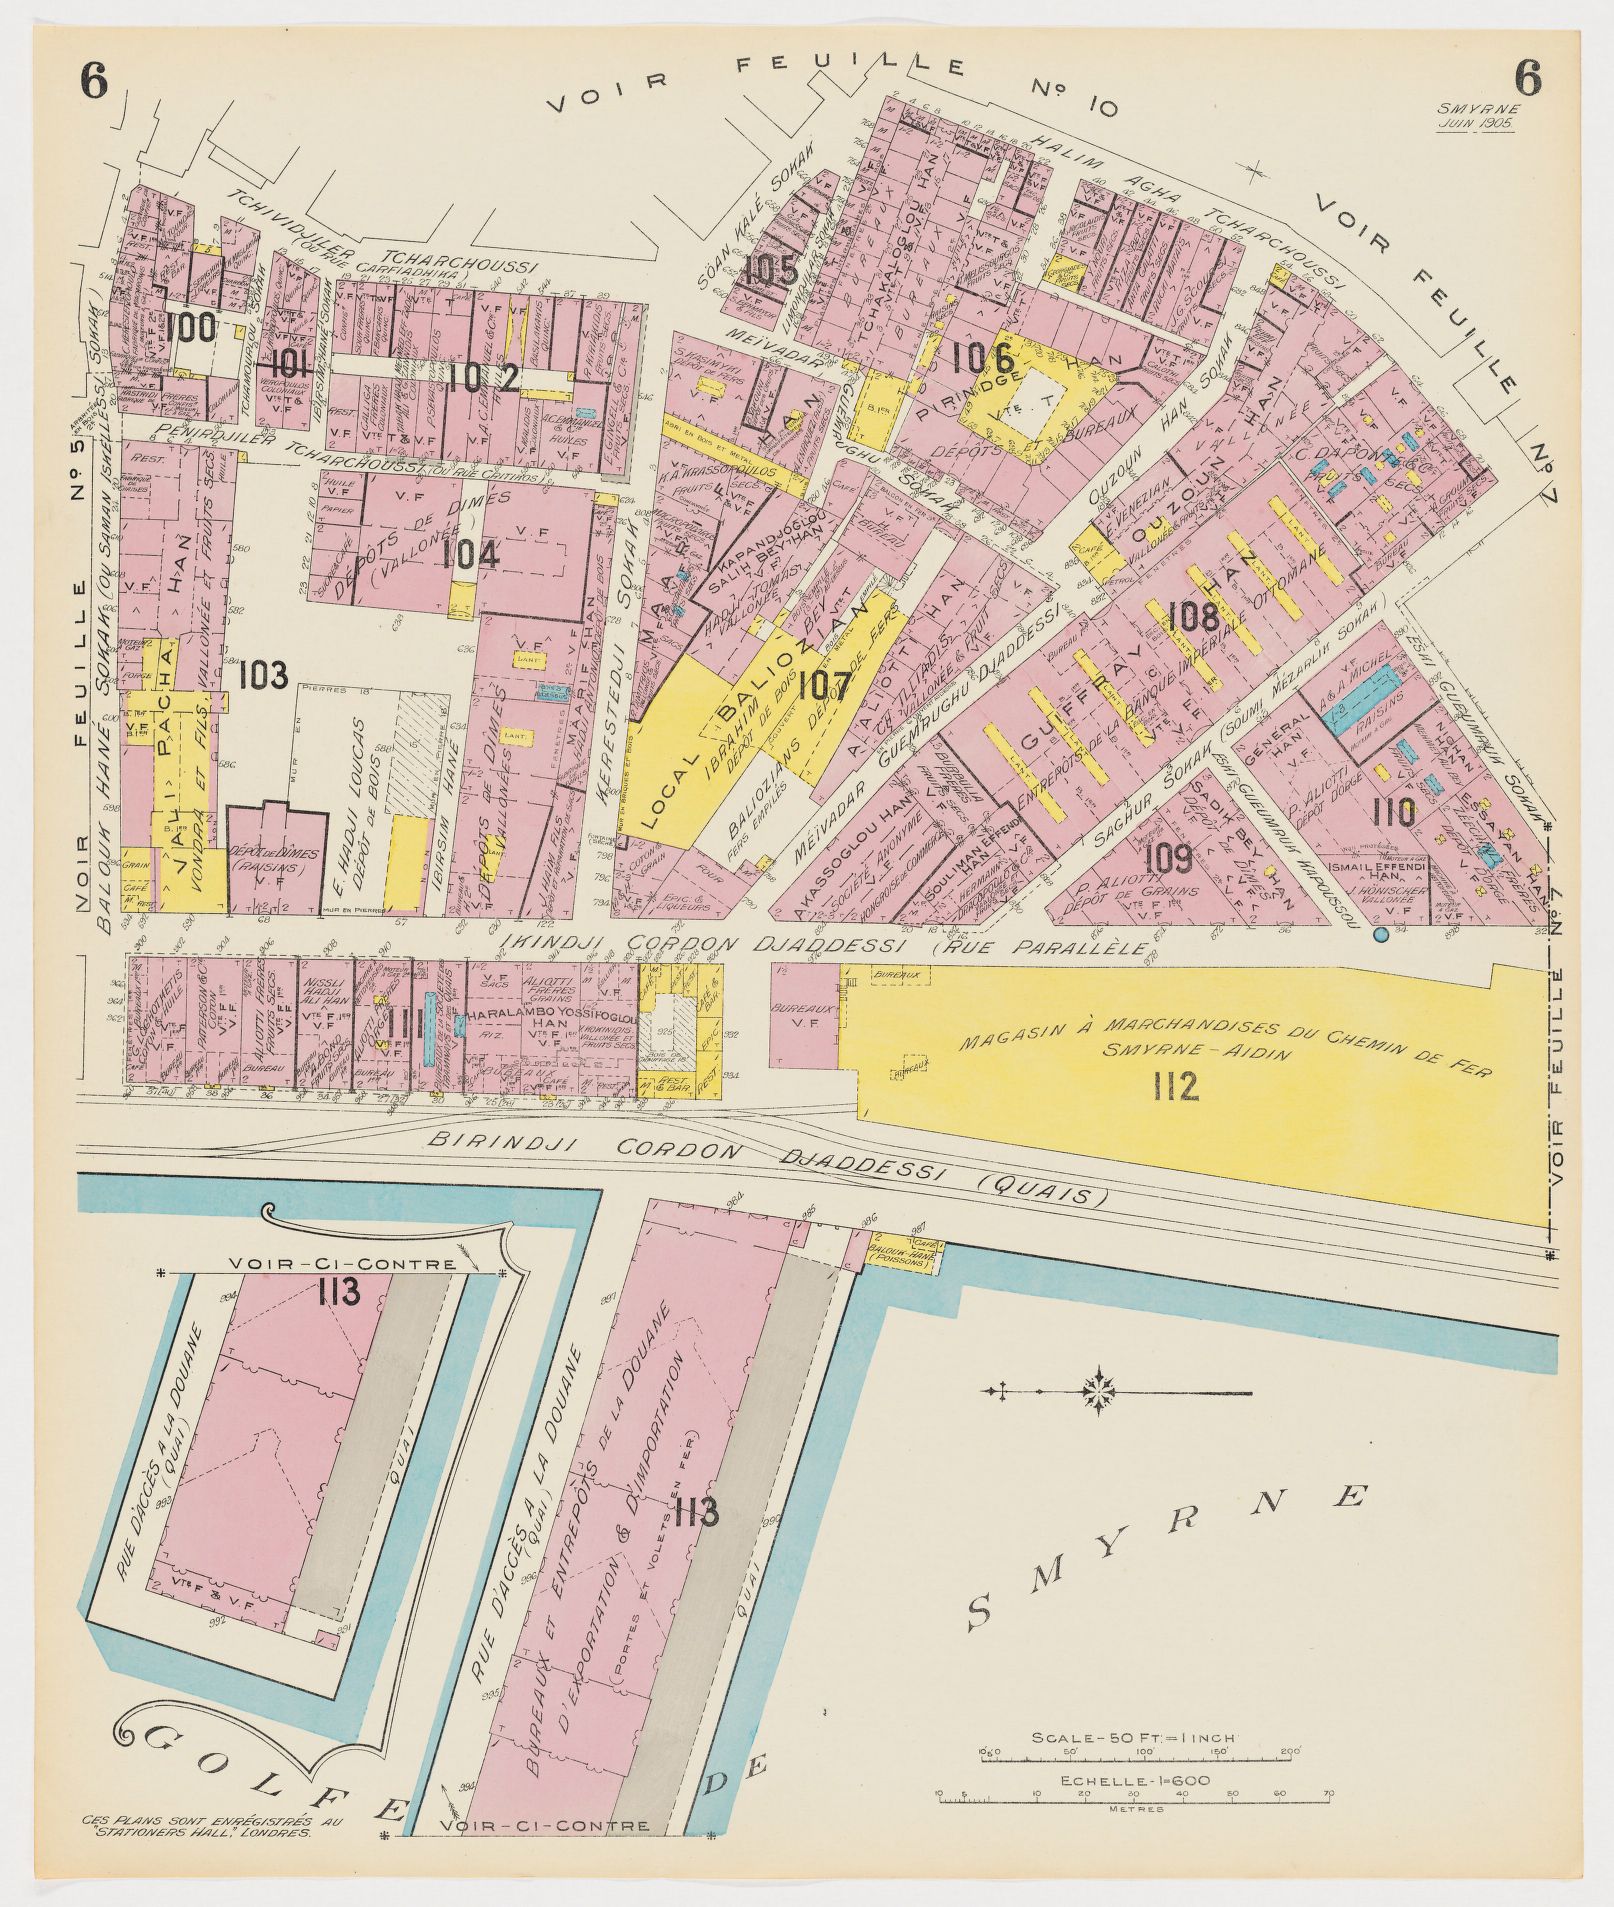 Charles E. Goad - <span style="color: rgb(1, 1, 1); line-height: 16px;">A sheet from the&nbsp;</span><span style="color: rgb(1, 1, 1); font-style: italic; line-height: 16px;">Plan d'assurance de Smyrne (Smyrna)&nbsp;</span><span style="color: rgb(1, 1, 1); line-height: 16px;">(Insurance Plan of Smyrna)</span><span style="color: rgb(1, 1, 1); line-height: 16px;">. The complete set of plans is available on&nbsp;</span><a href="http://archnet.org/publications/10377" target="_blank" data-bypass="true" style="line-height: 16px;">Archnet</a><span style="color: rgb(1, 1, 1); line-height: 16px;">.</span><br>